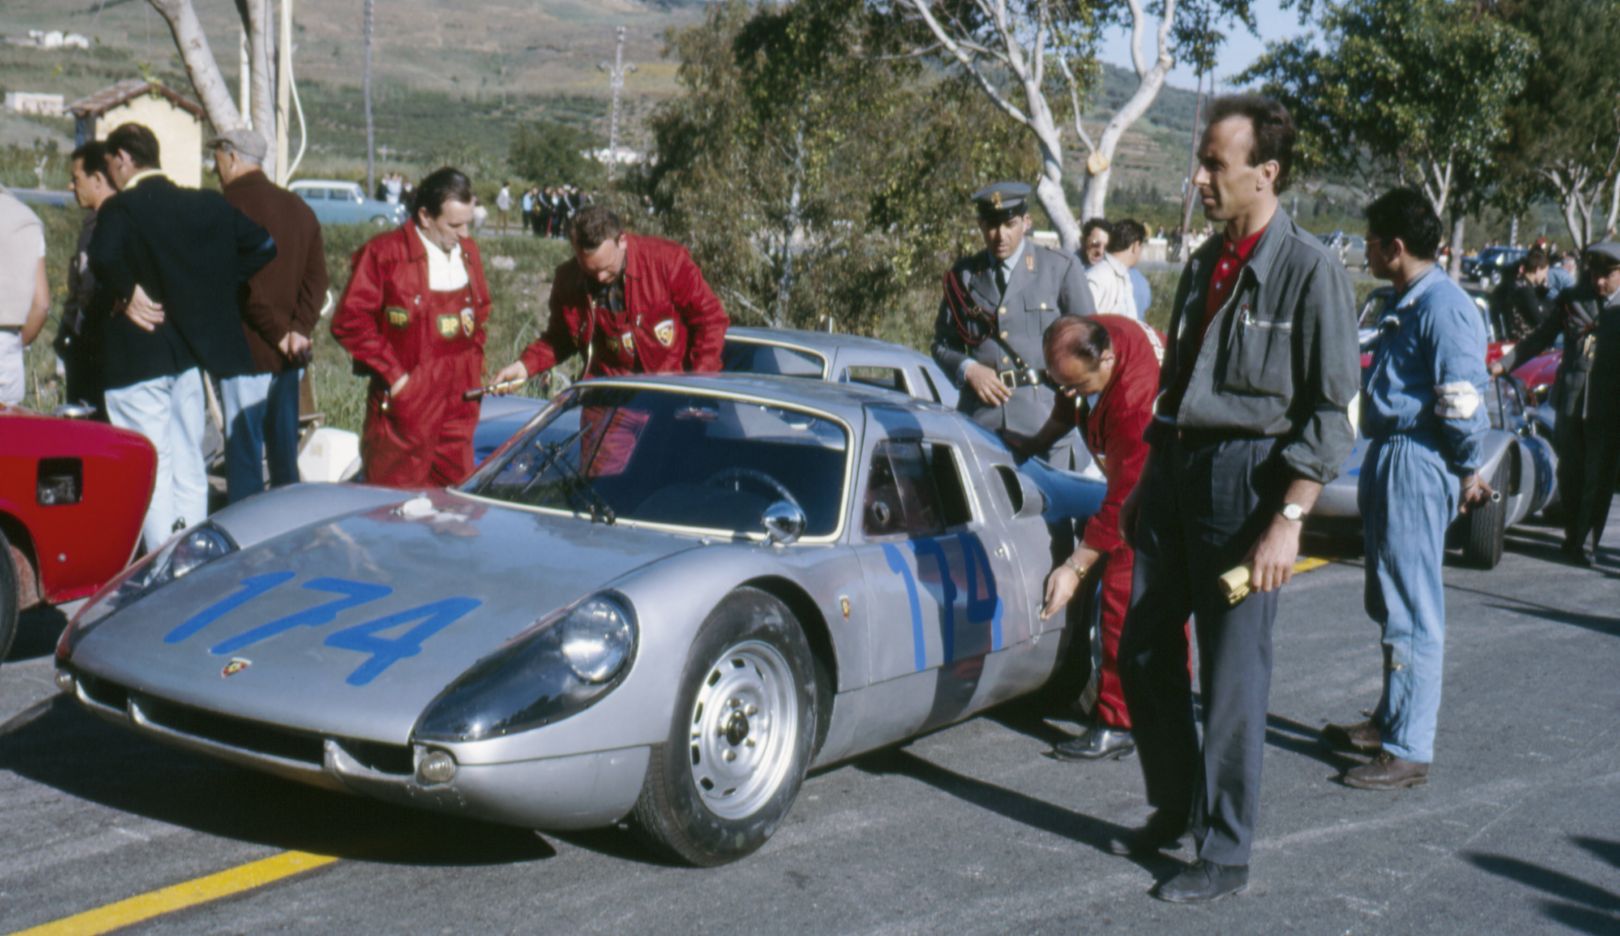 In 1963, the Porsche 904 GTS turned over a new leaf, as it was the first Porsche whose body was made up completely of glass-reinforced plastic (GRP). 